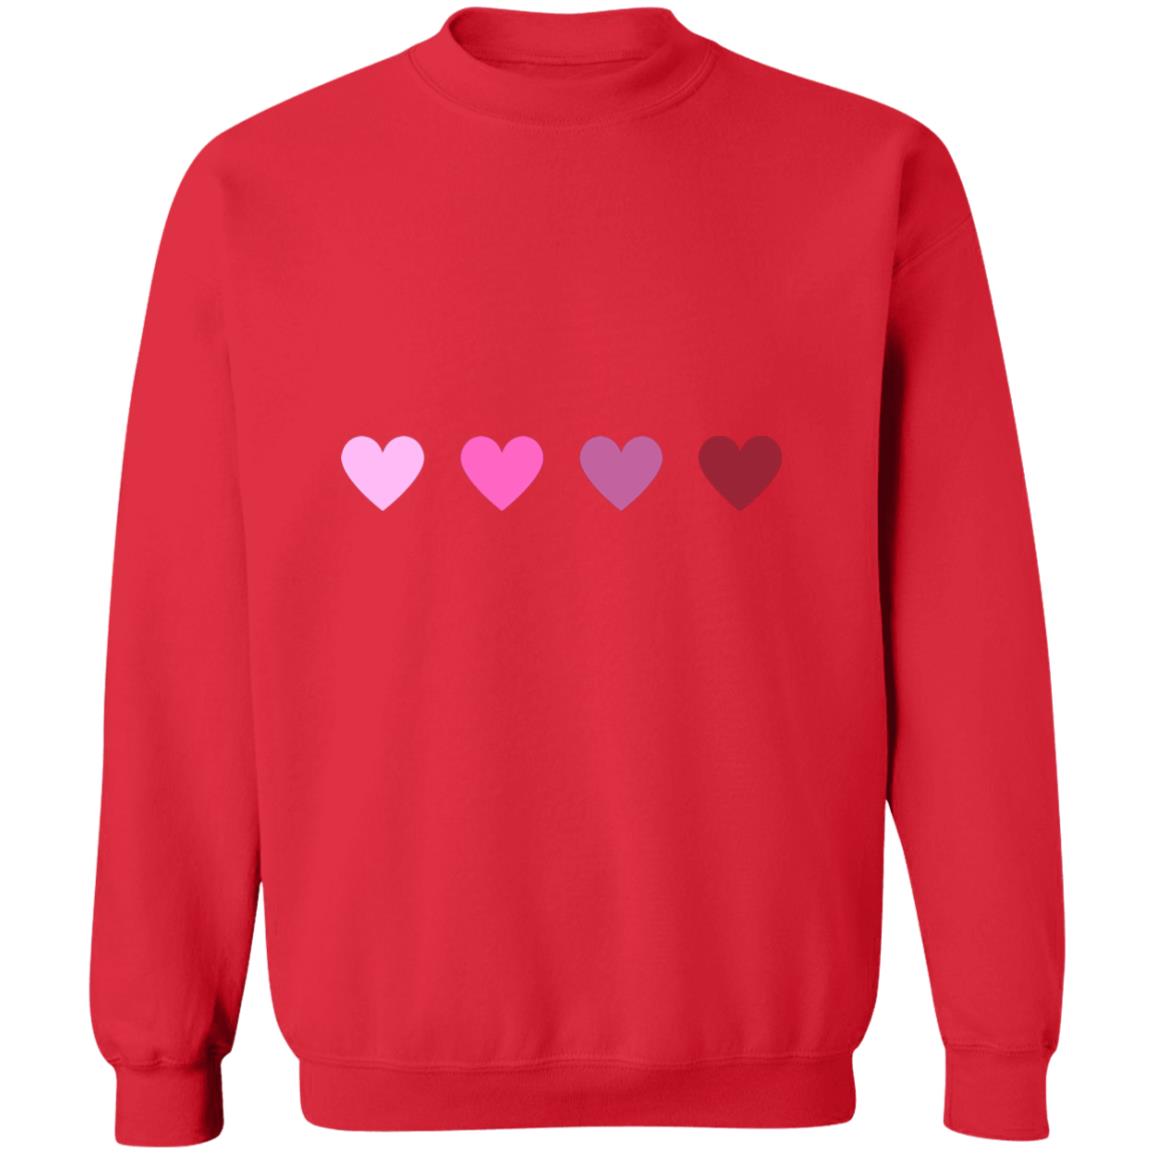 Get trendy with 4 hearts sweatshirt (3) Valentine Hearts Crewneck Pullover Sweatshirt - Sweatshirts available at Good Gift Company. Grab yours for $28.95 today!